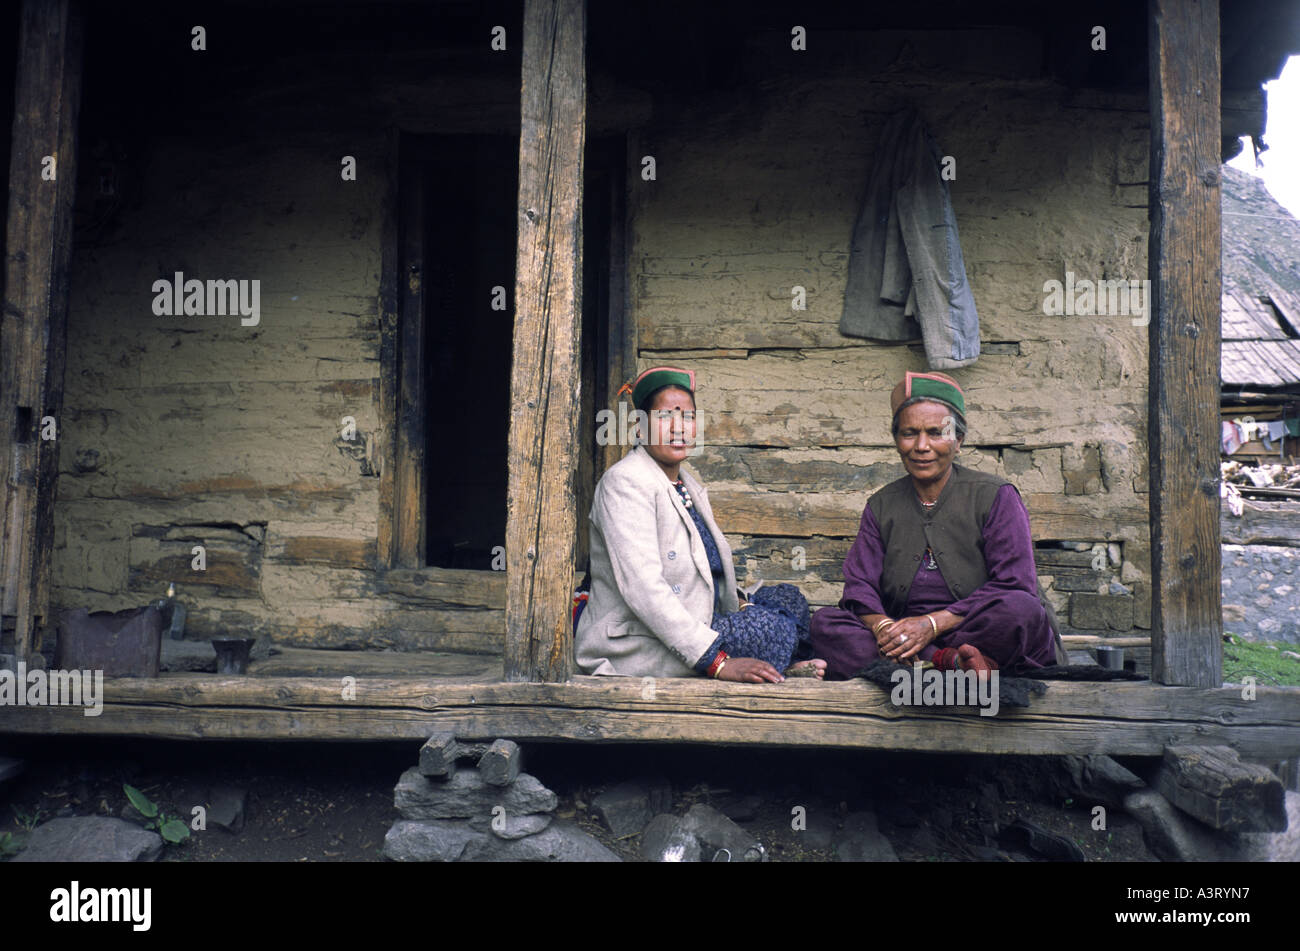 Two local women in traditional dress and wearing Thepang hats, sit outside a wooden house in Chitkul, Himachal Pradesh India Stock Photo